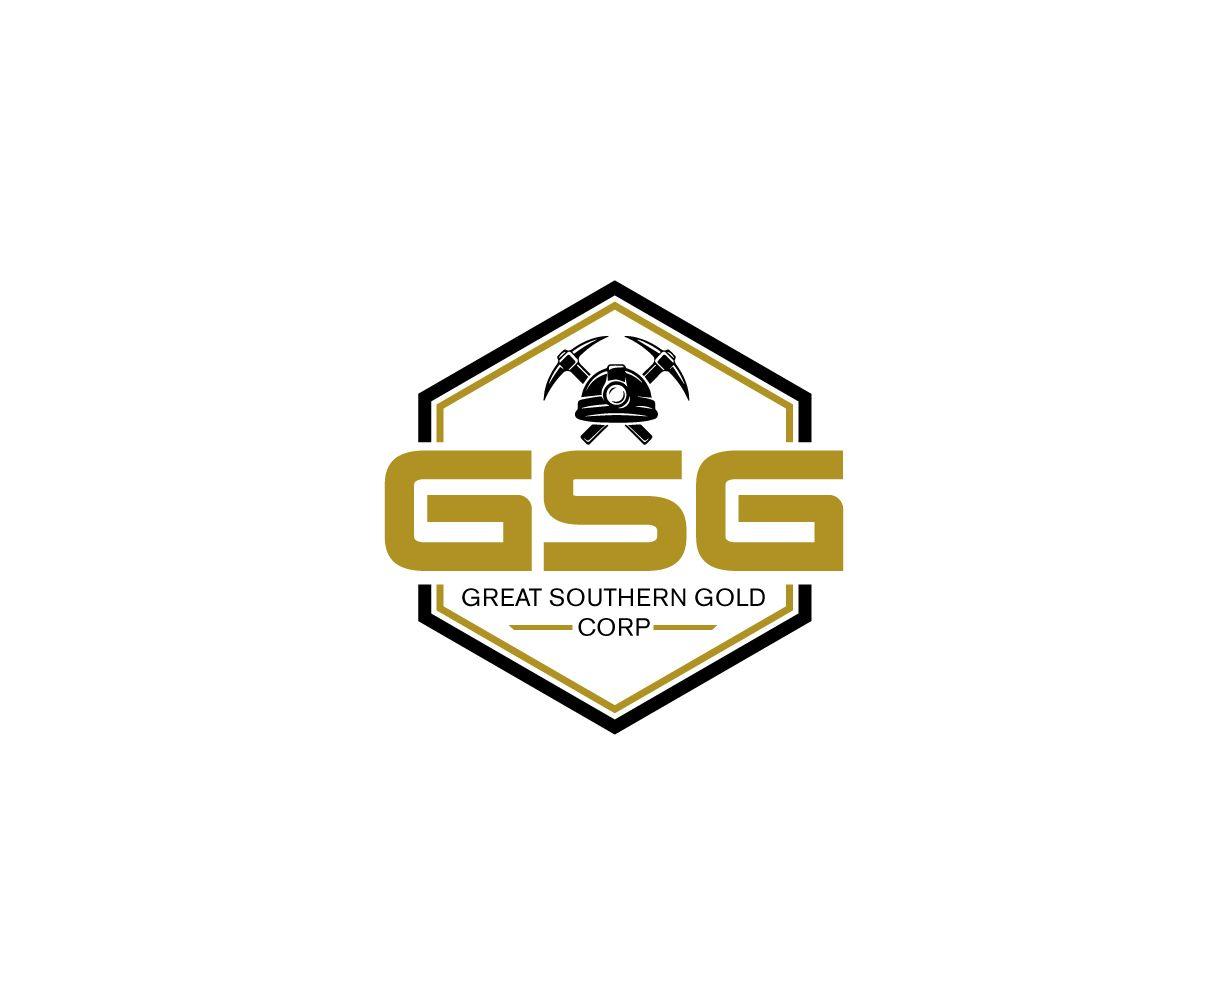 Gold Mining Logo - Professional, Conservative, Mining Logo Design for Either Great